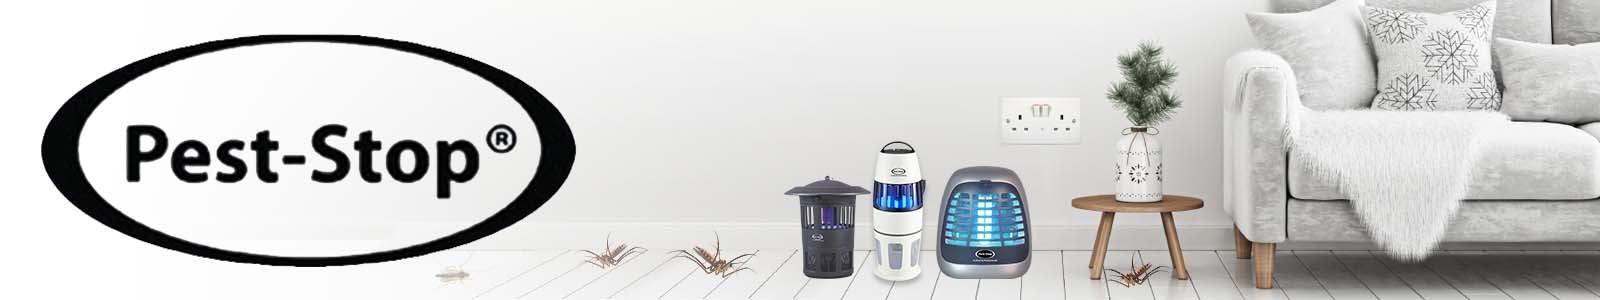 Pest Stop is the number 1 choice to fight mosquito and other bugs in Singapore